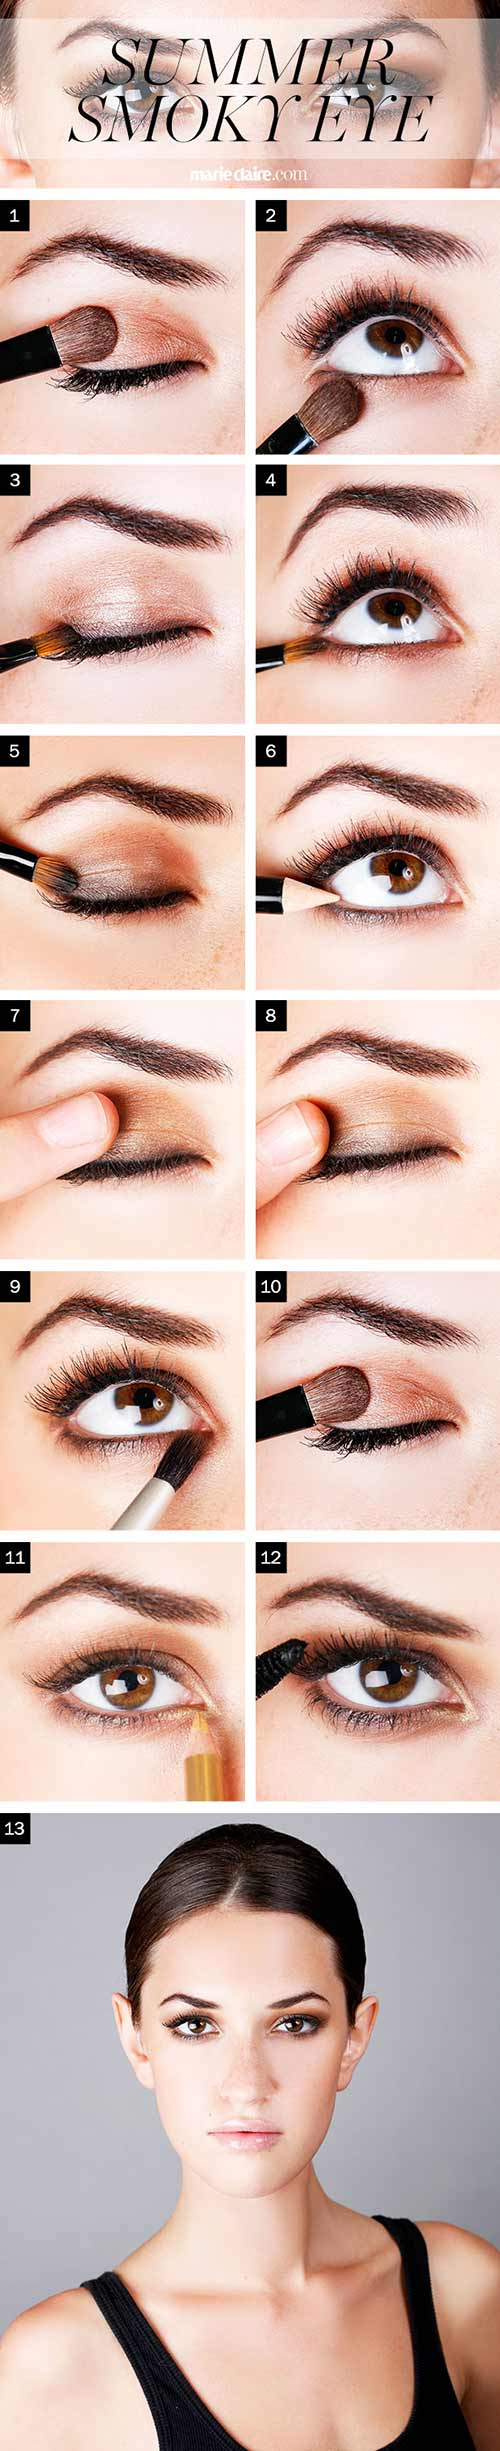 Nude Eye Makeup Tutorial How To Do Smokey Eye Makeup Top 10 Tutorial Pictures For 2019